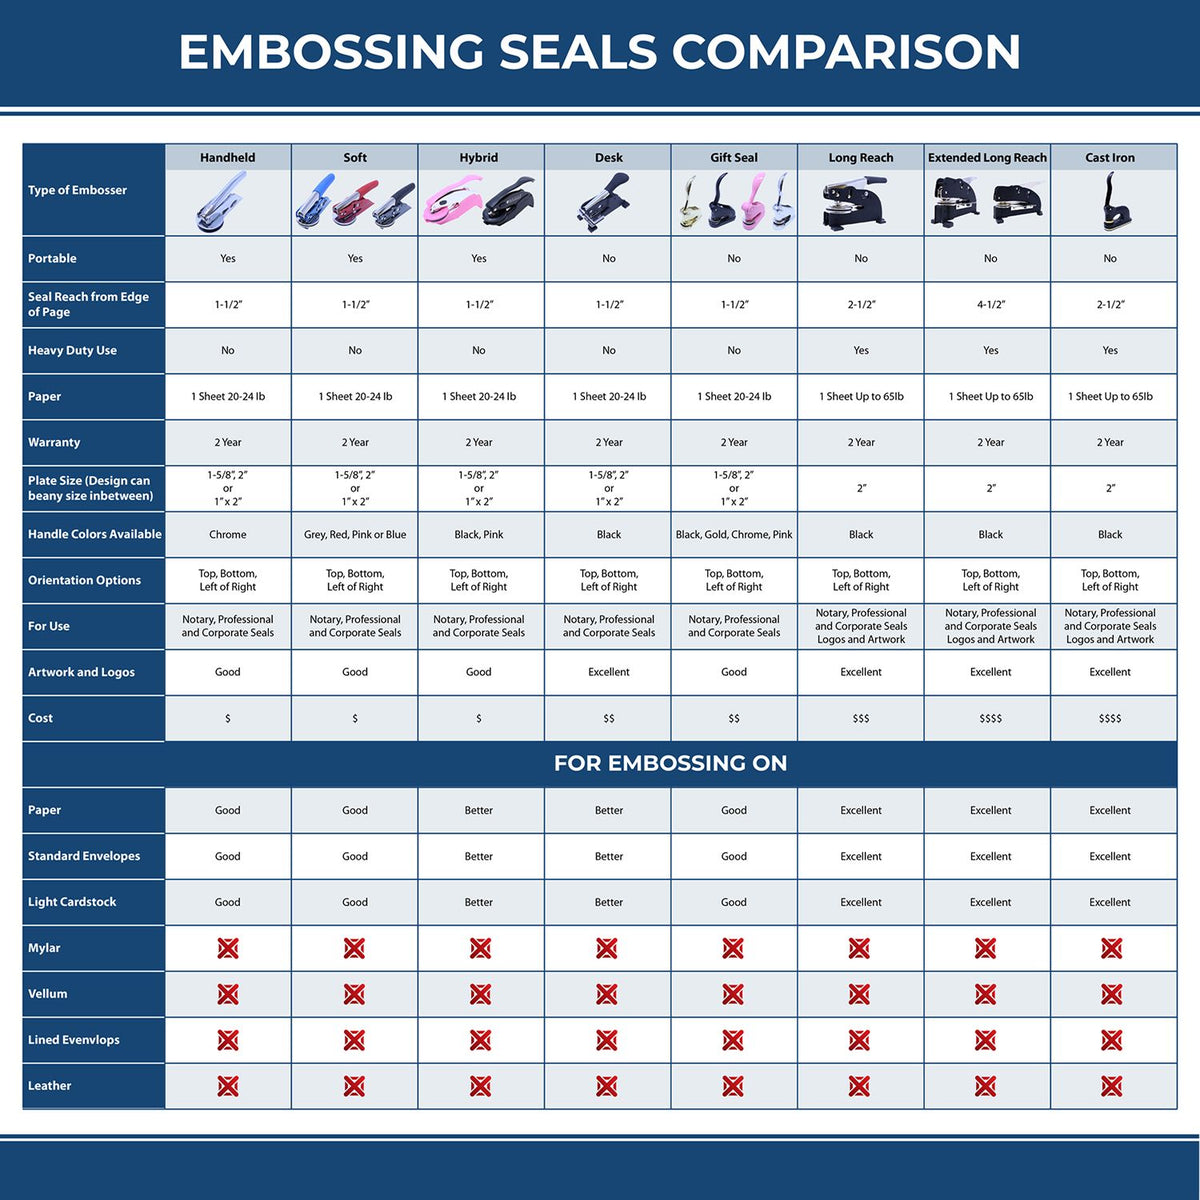 A comparison chart for the different types of mount models available for the Extended Long Reach Virginia Architect Seal Embosser.